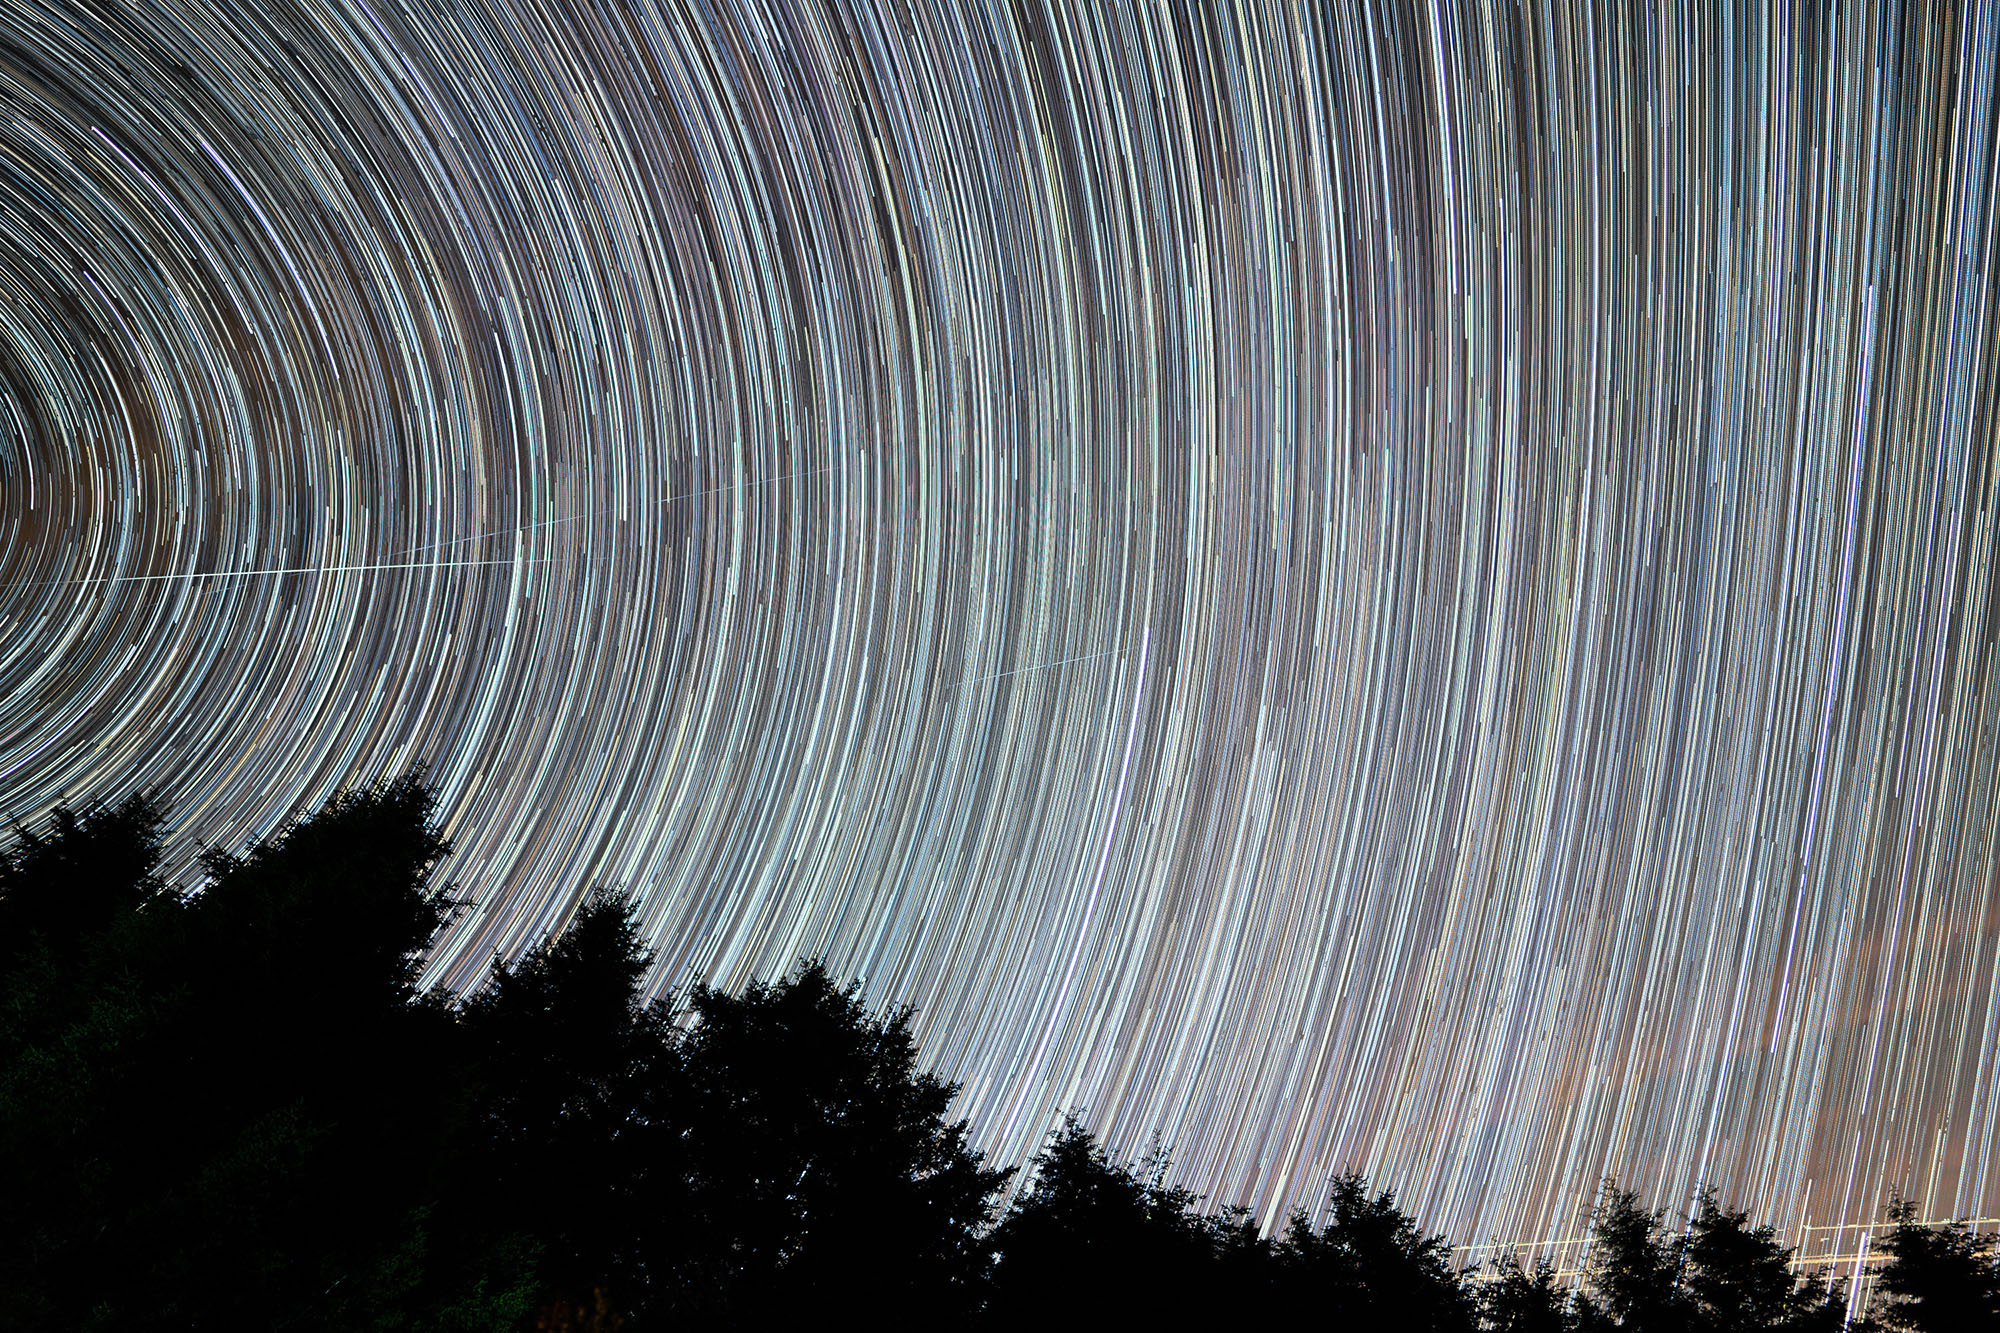 These star trails may have gotten a bit out of hand...